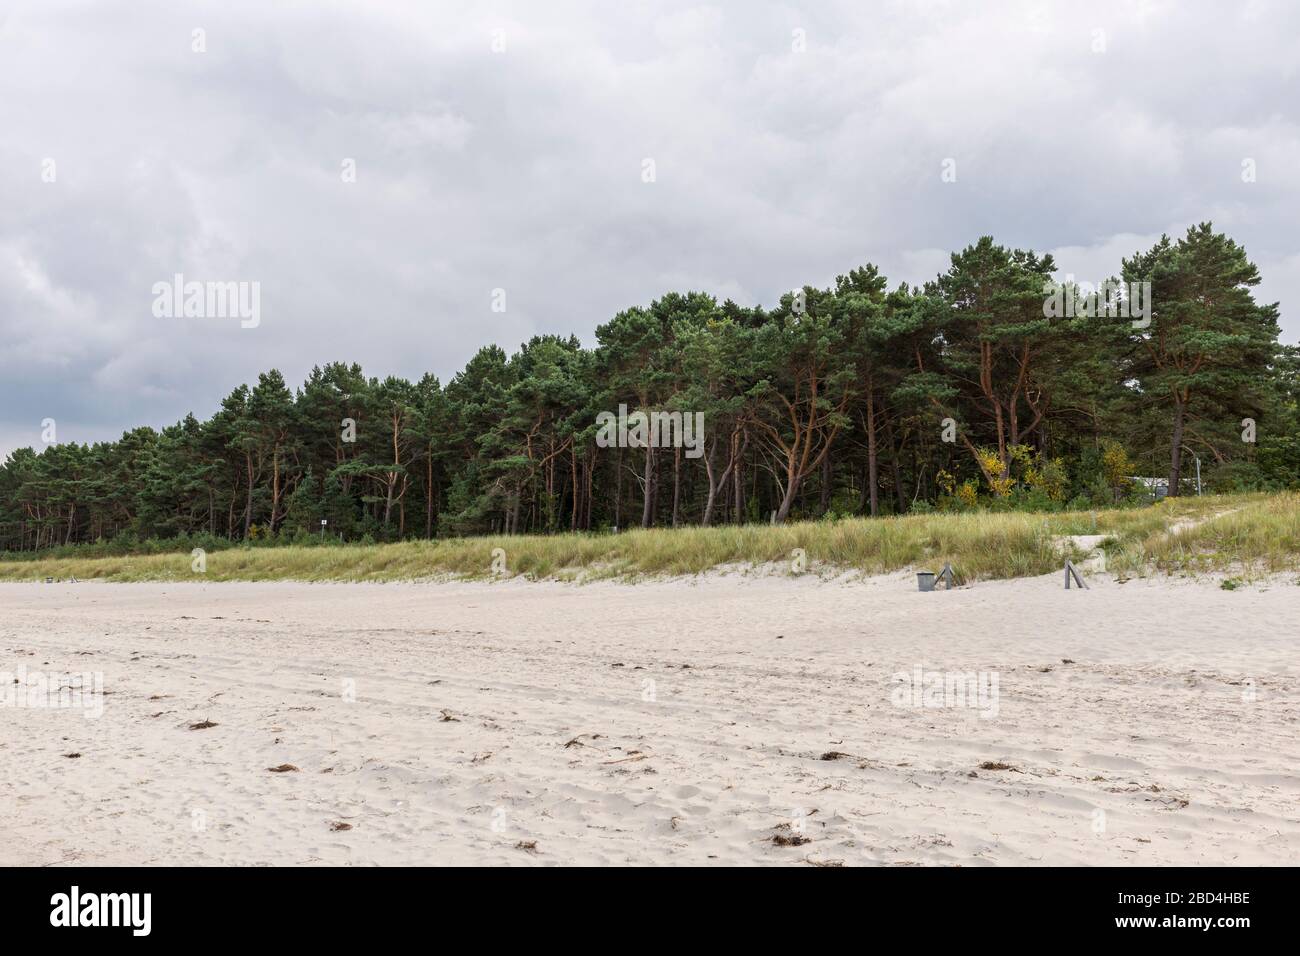 Woodland and vegetation directly behind the beach on the island of Rügen, Germany Stock Photo